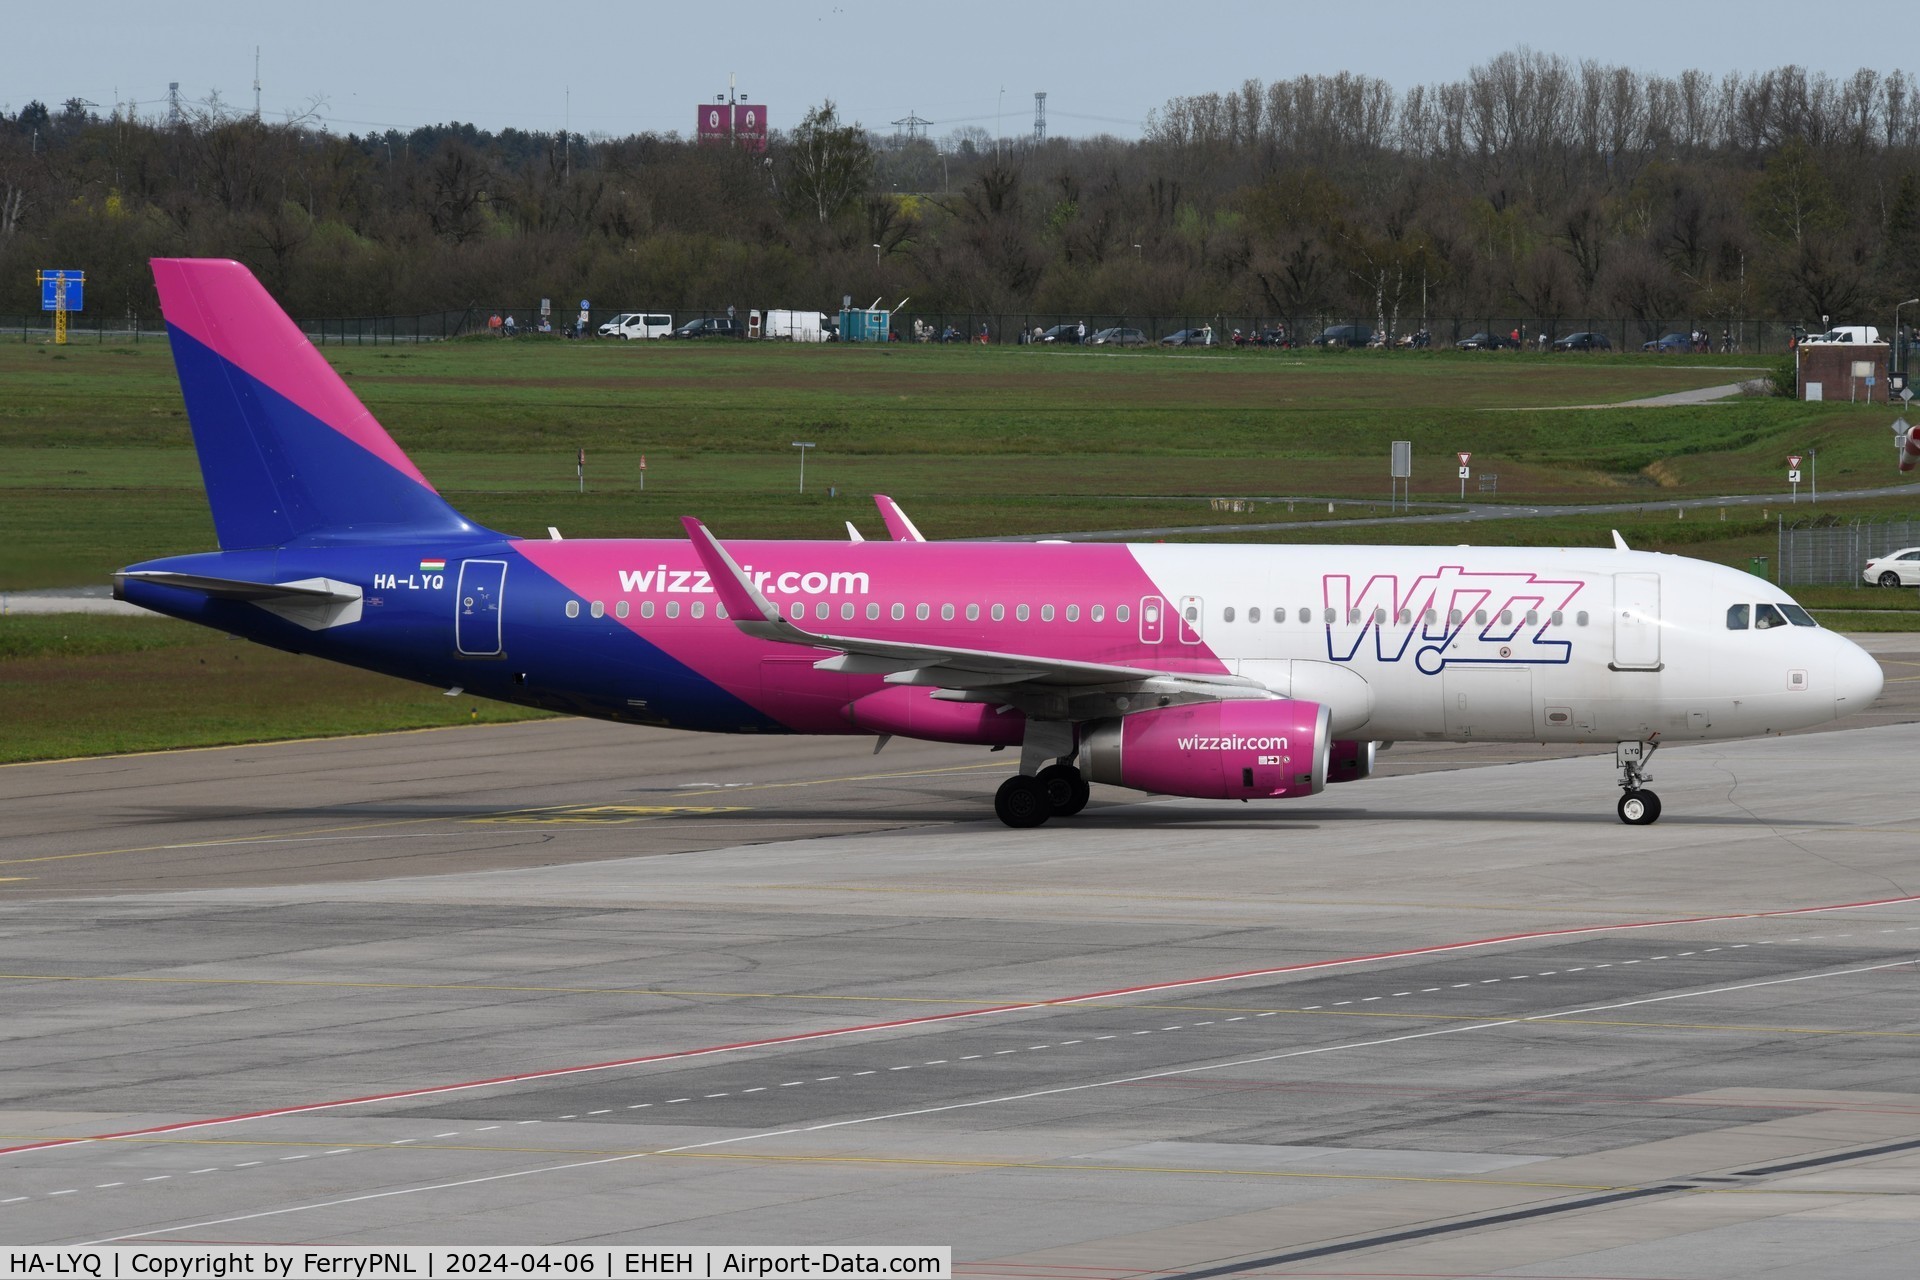 HA-LYQ, 2015 Airbus A320-232 C/N 6614, Wizz Air A320 taxying to its stand